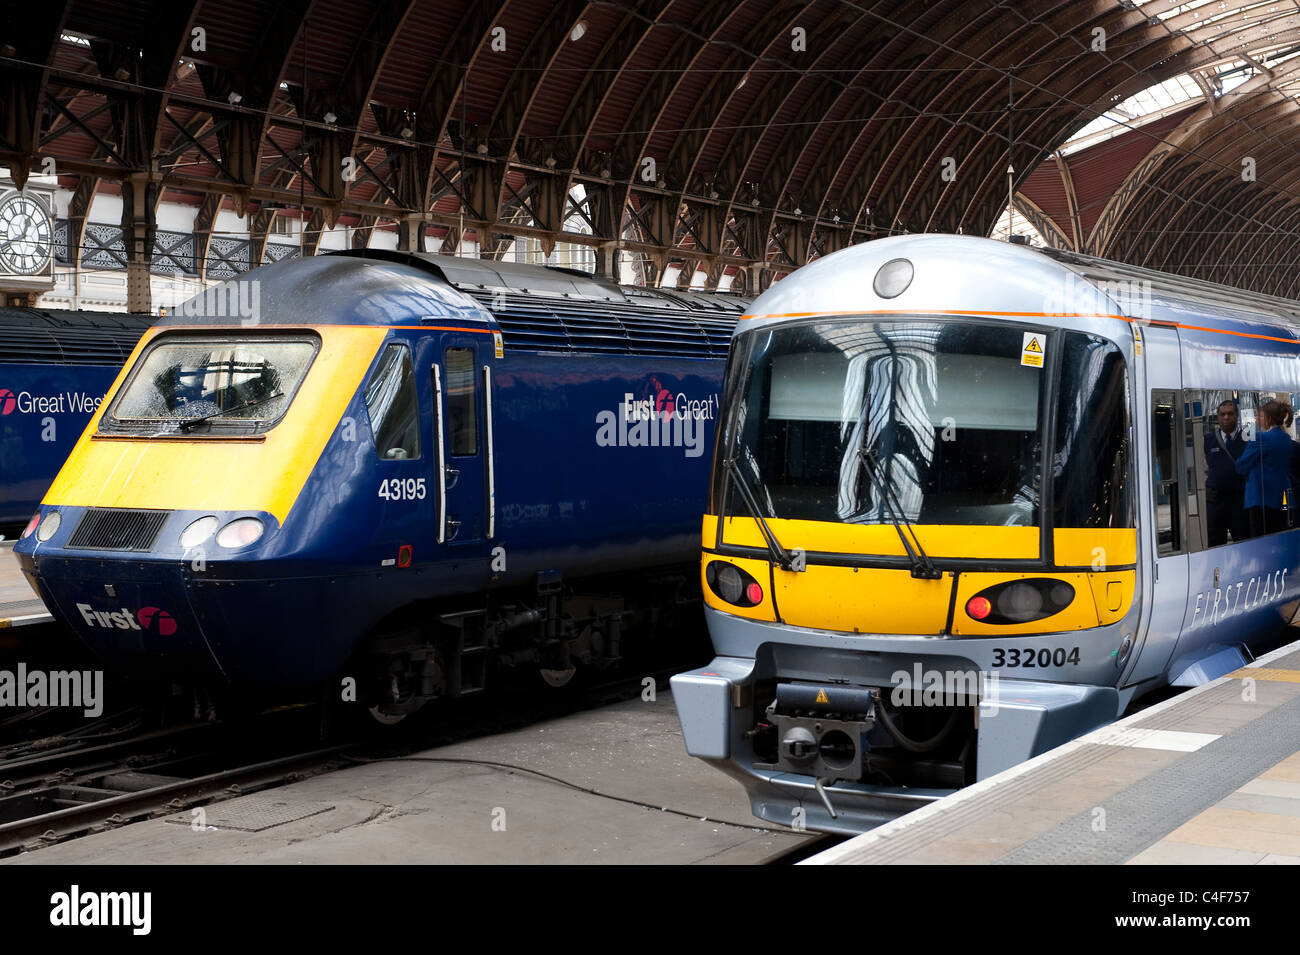 Heathrow Express class 332 and First Great Western class 43 trains waiting at a platform at Paddington Railway Station, London. Stock Photo